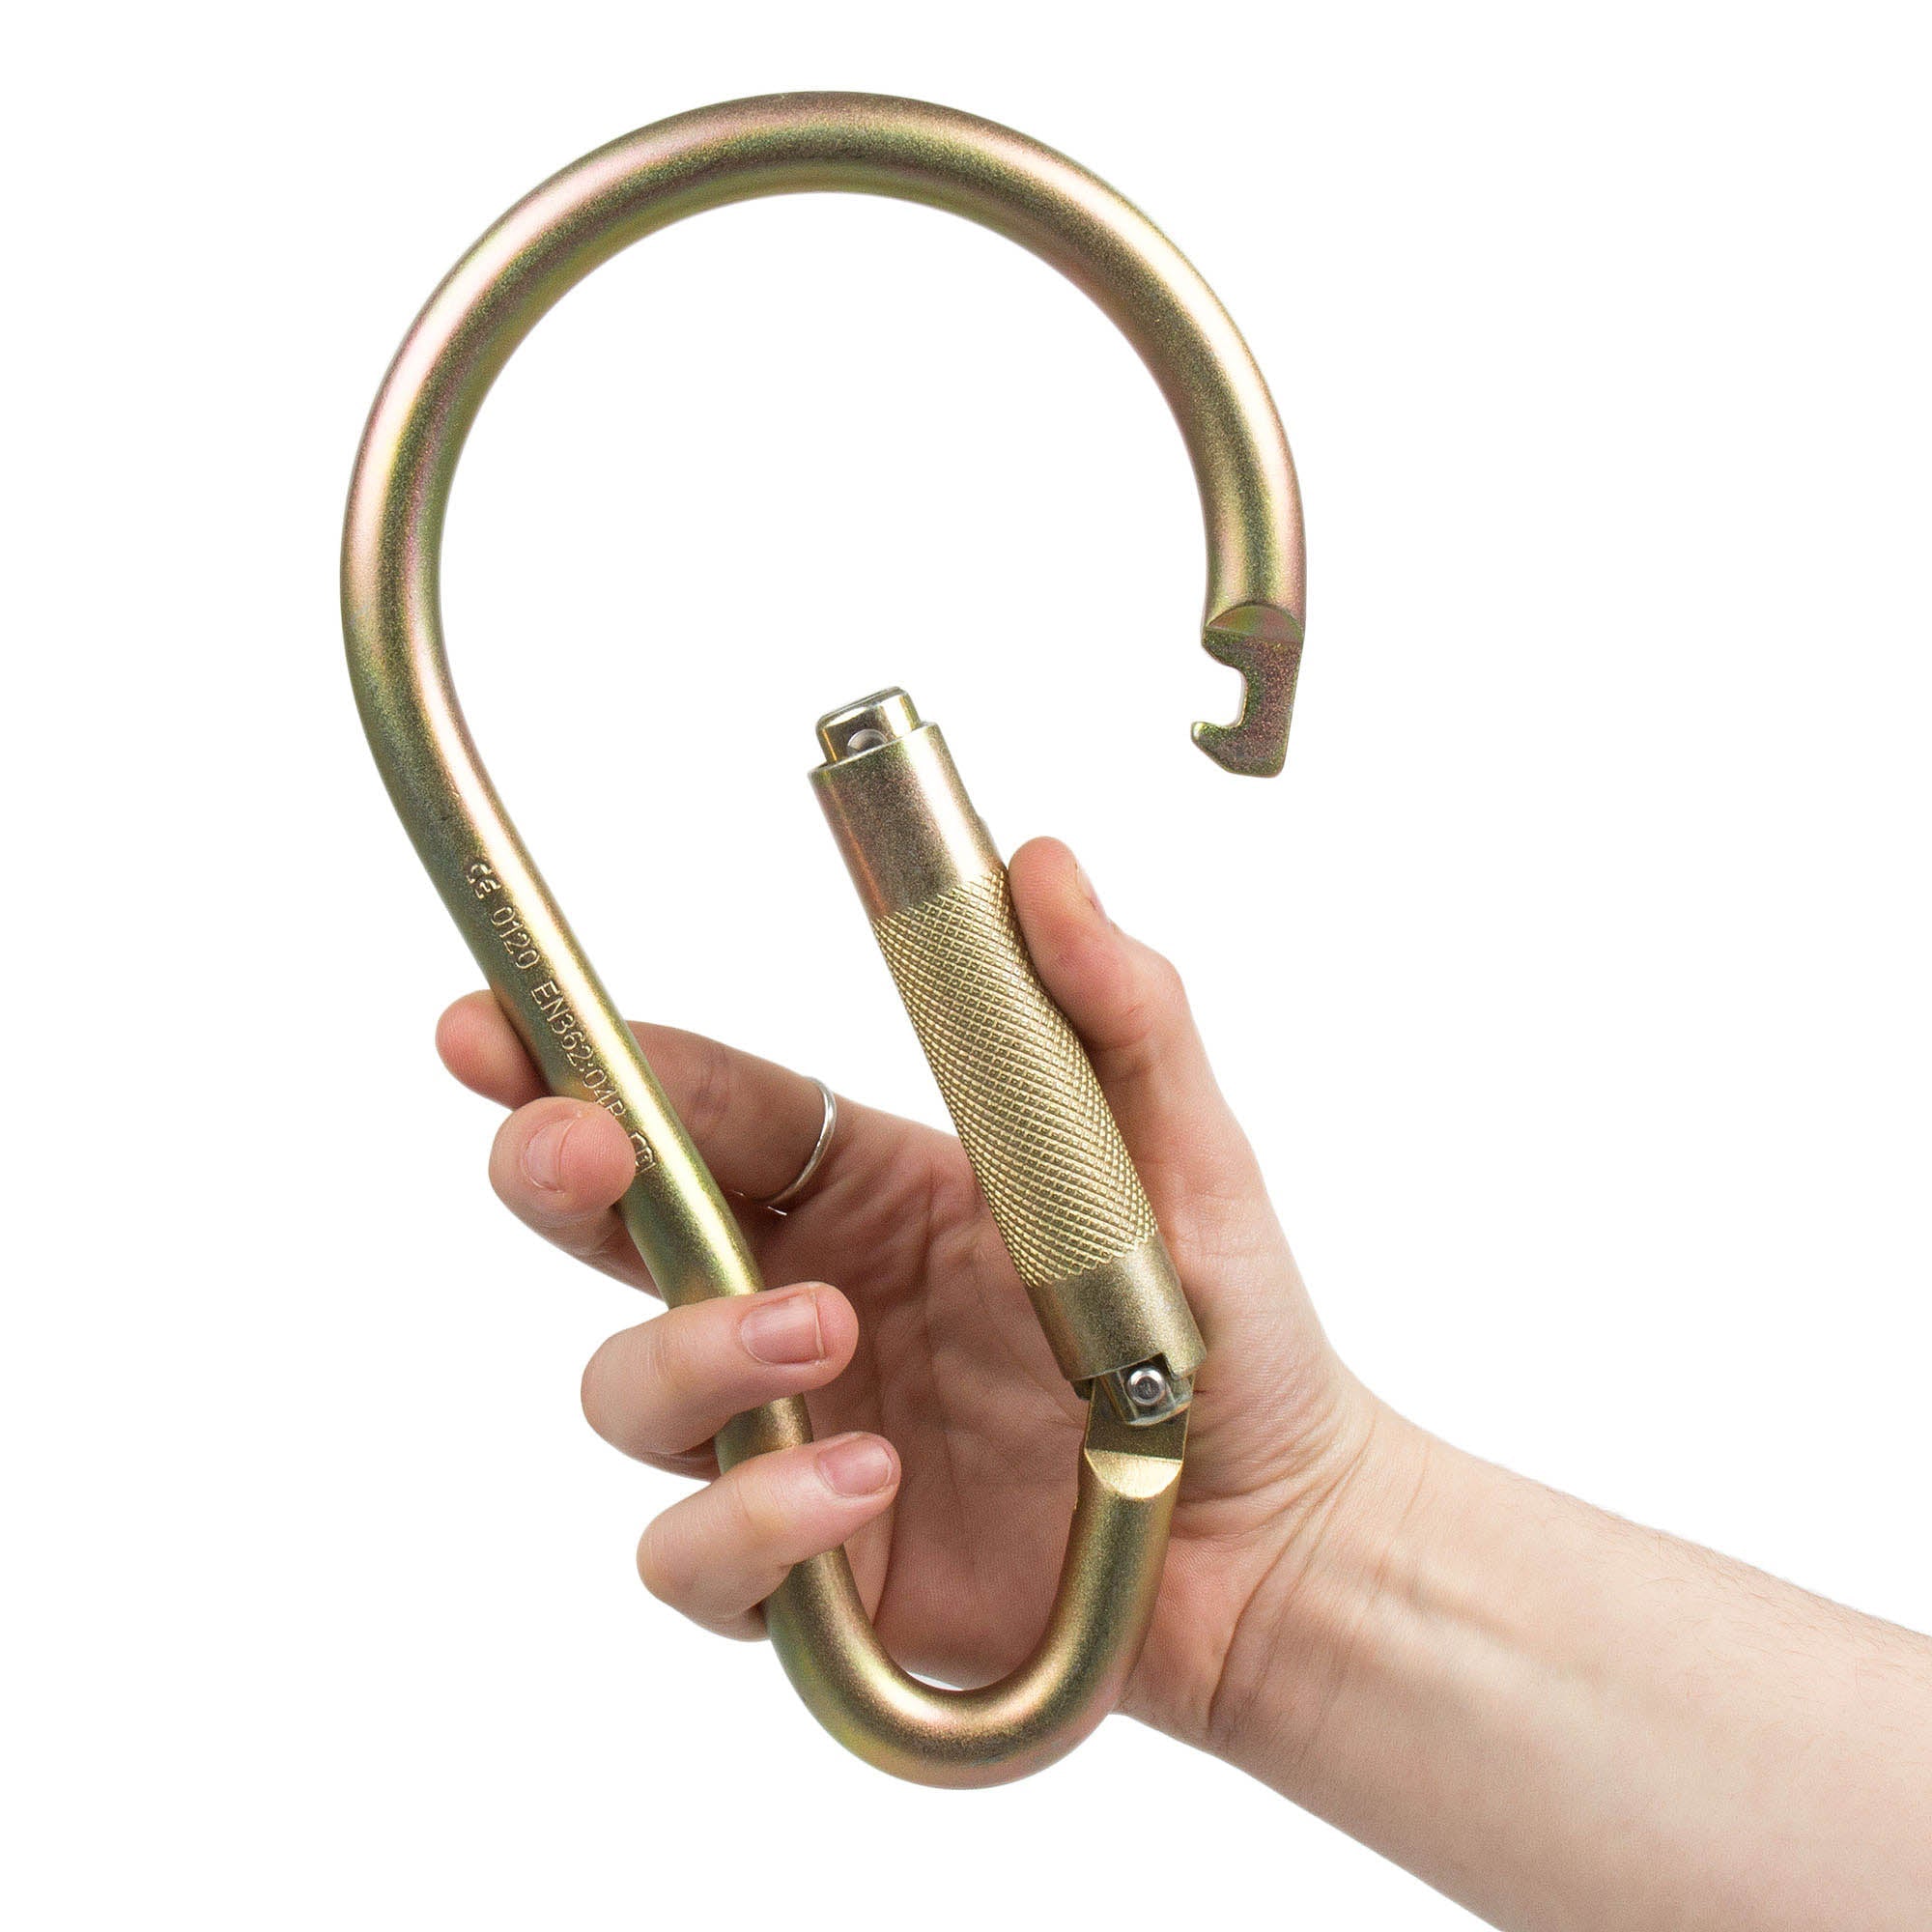 Large pear shaped carabiner with gate held open